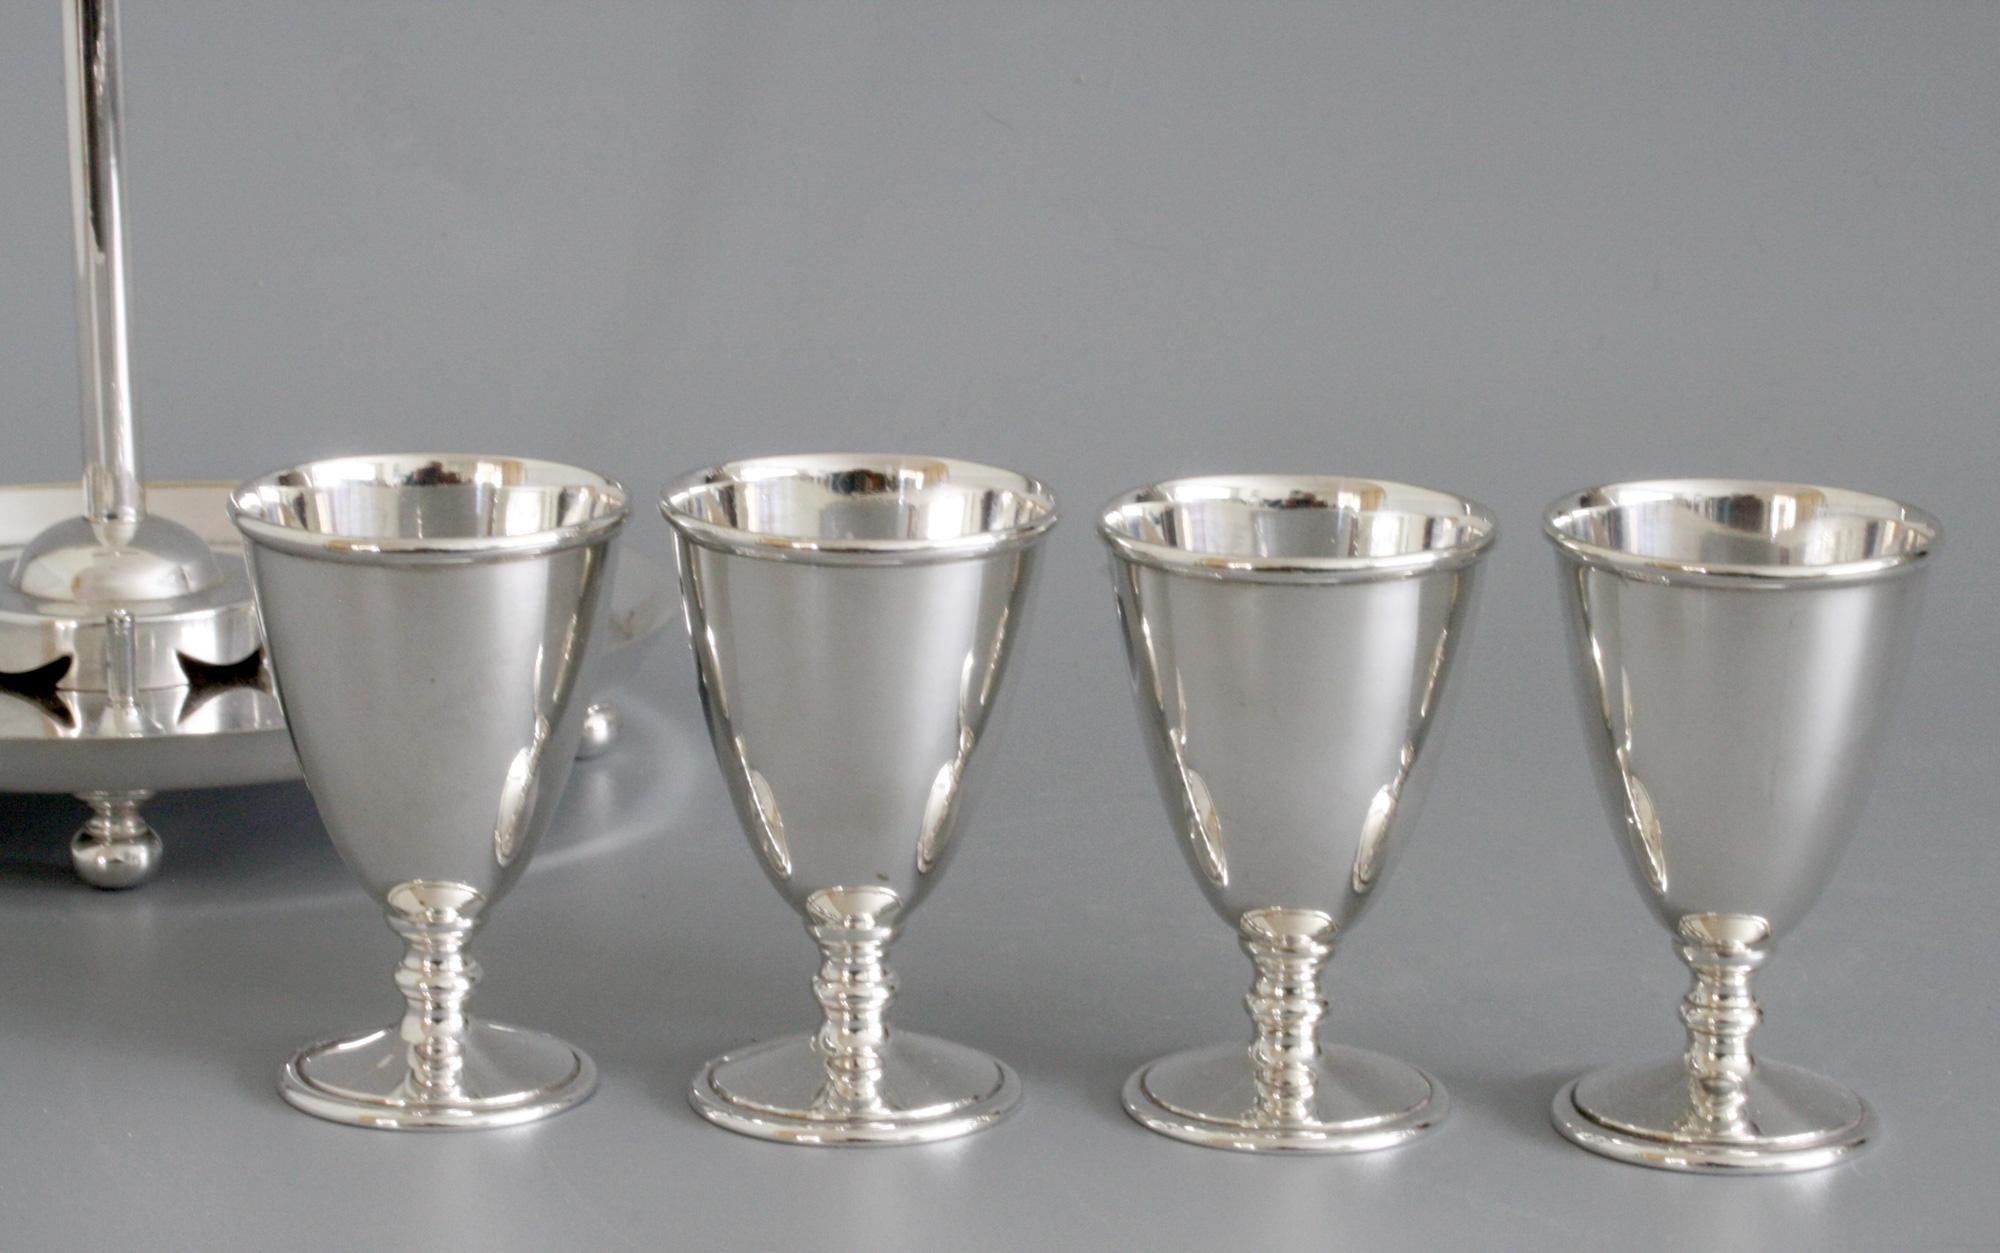 Hukin & Heath Silver Plated Four Eggcup Stand Designed by Christopher Dresser 12